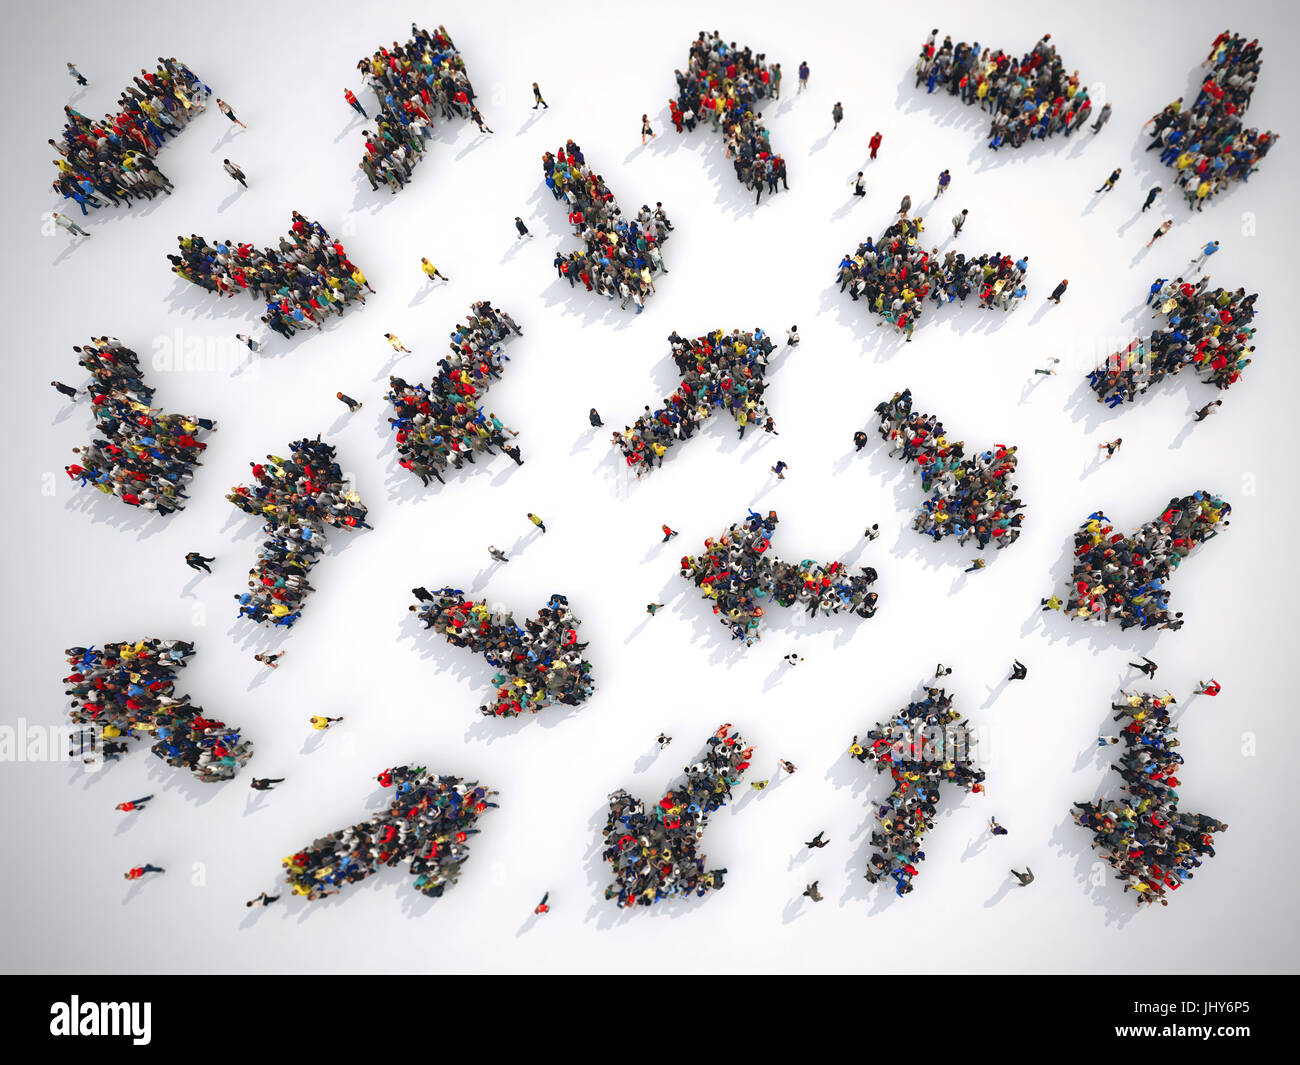 People have to choose the right direction. Concept of confusion. 3D Rendering Stock Photo